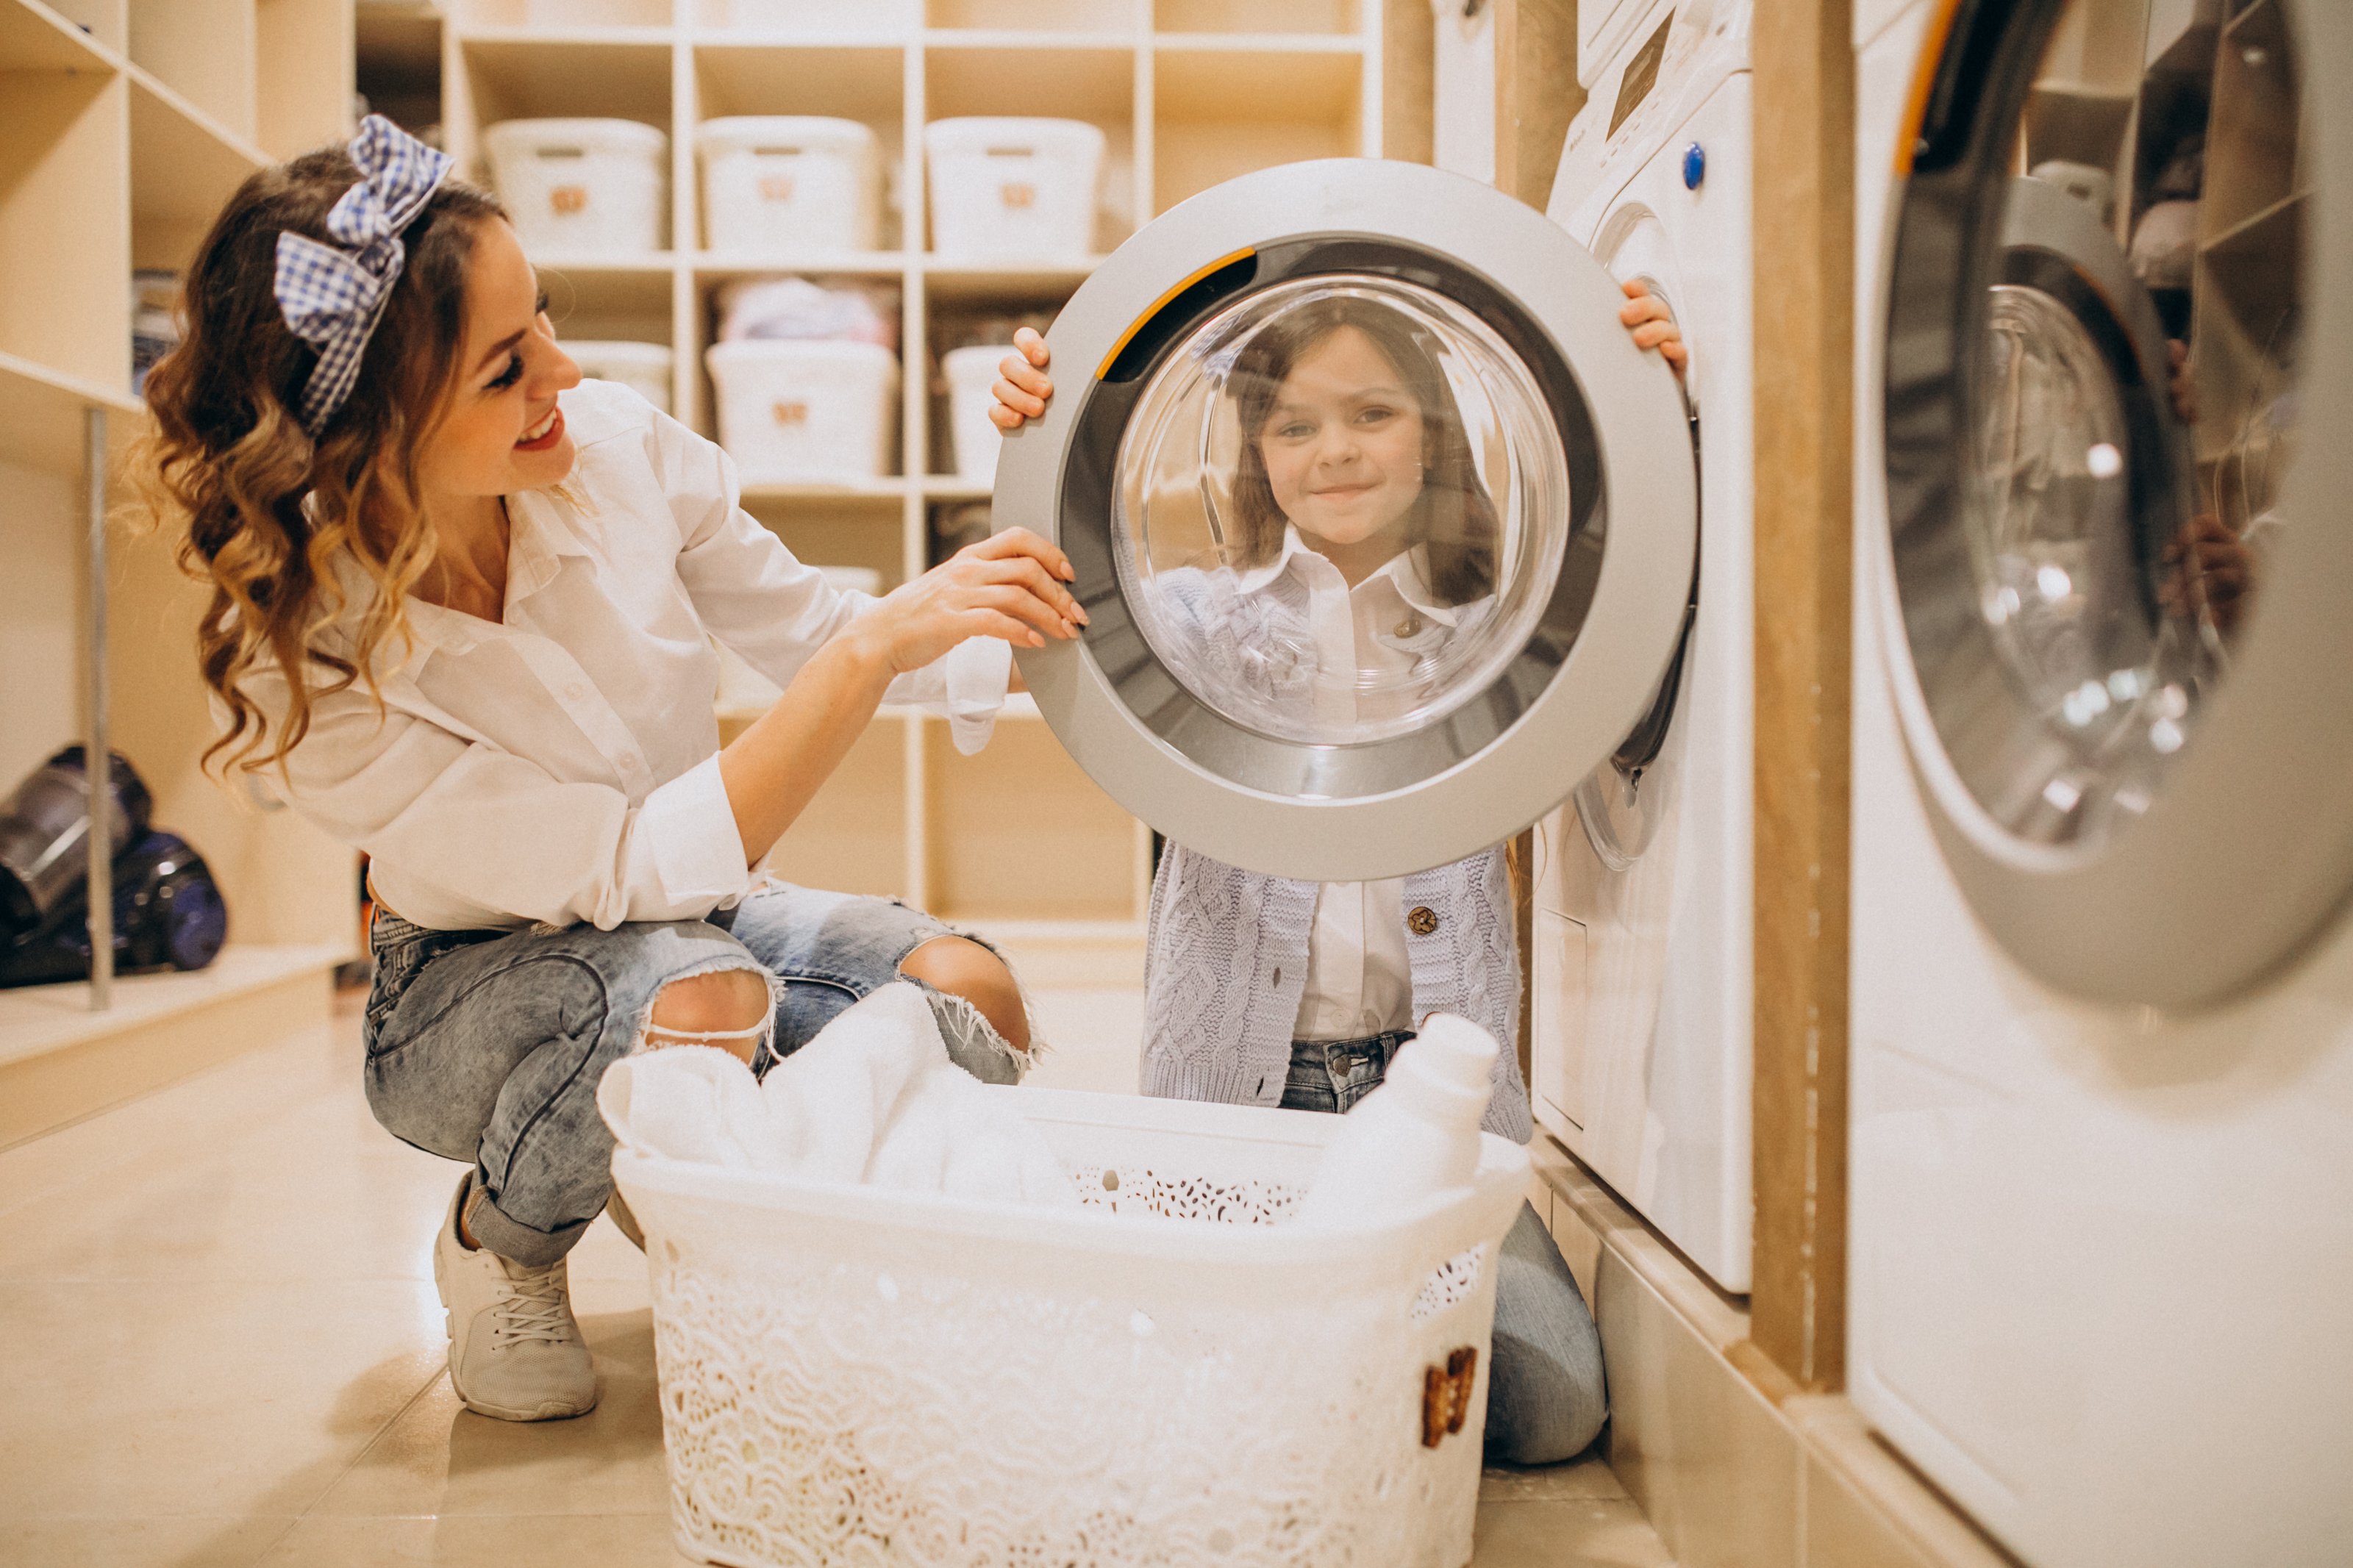 How to choose the right washer and dryer